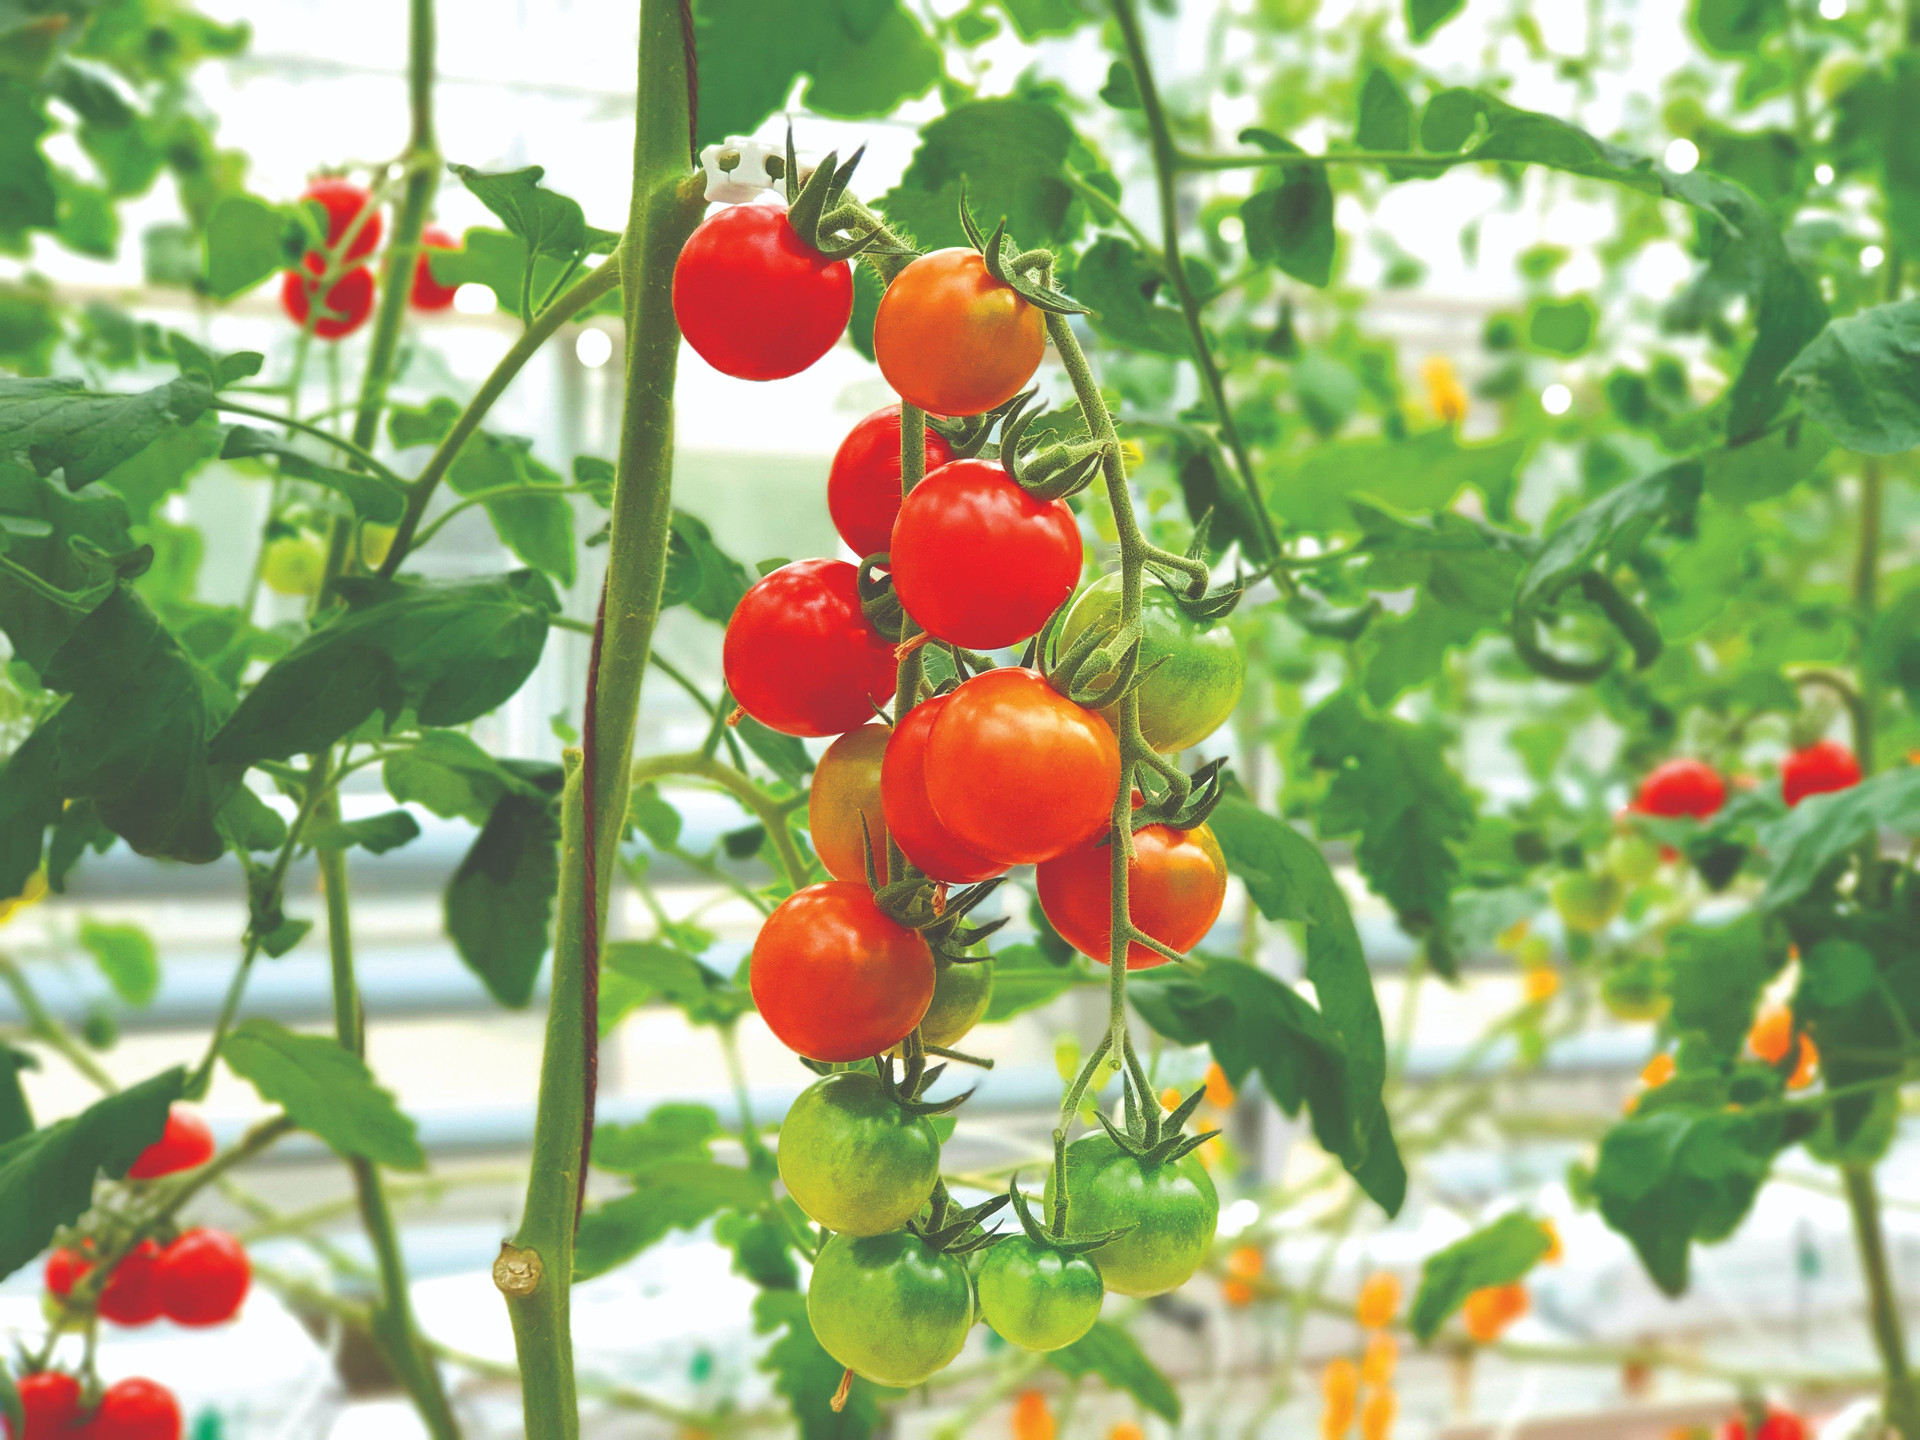 colorful-tomatoes-vegetables-fruits-are-growing-indoor-farm-vertical-farm-compressed.jpg